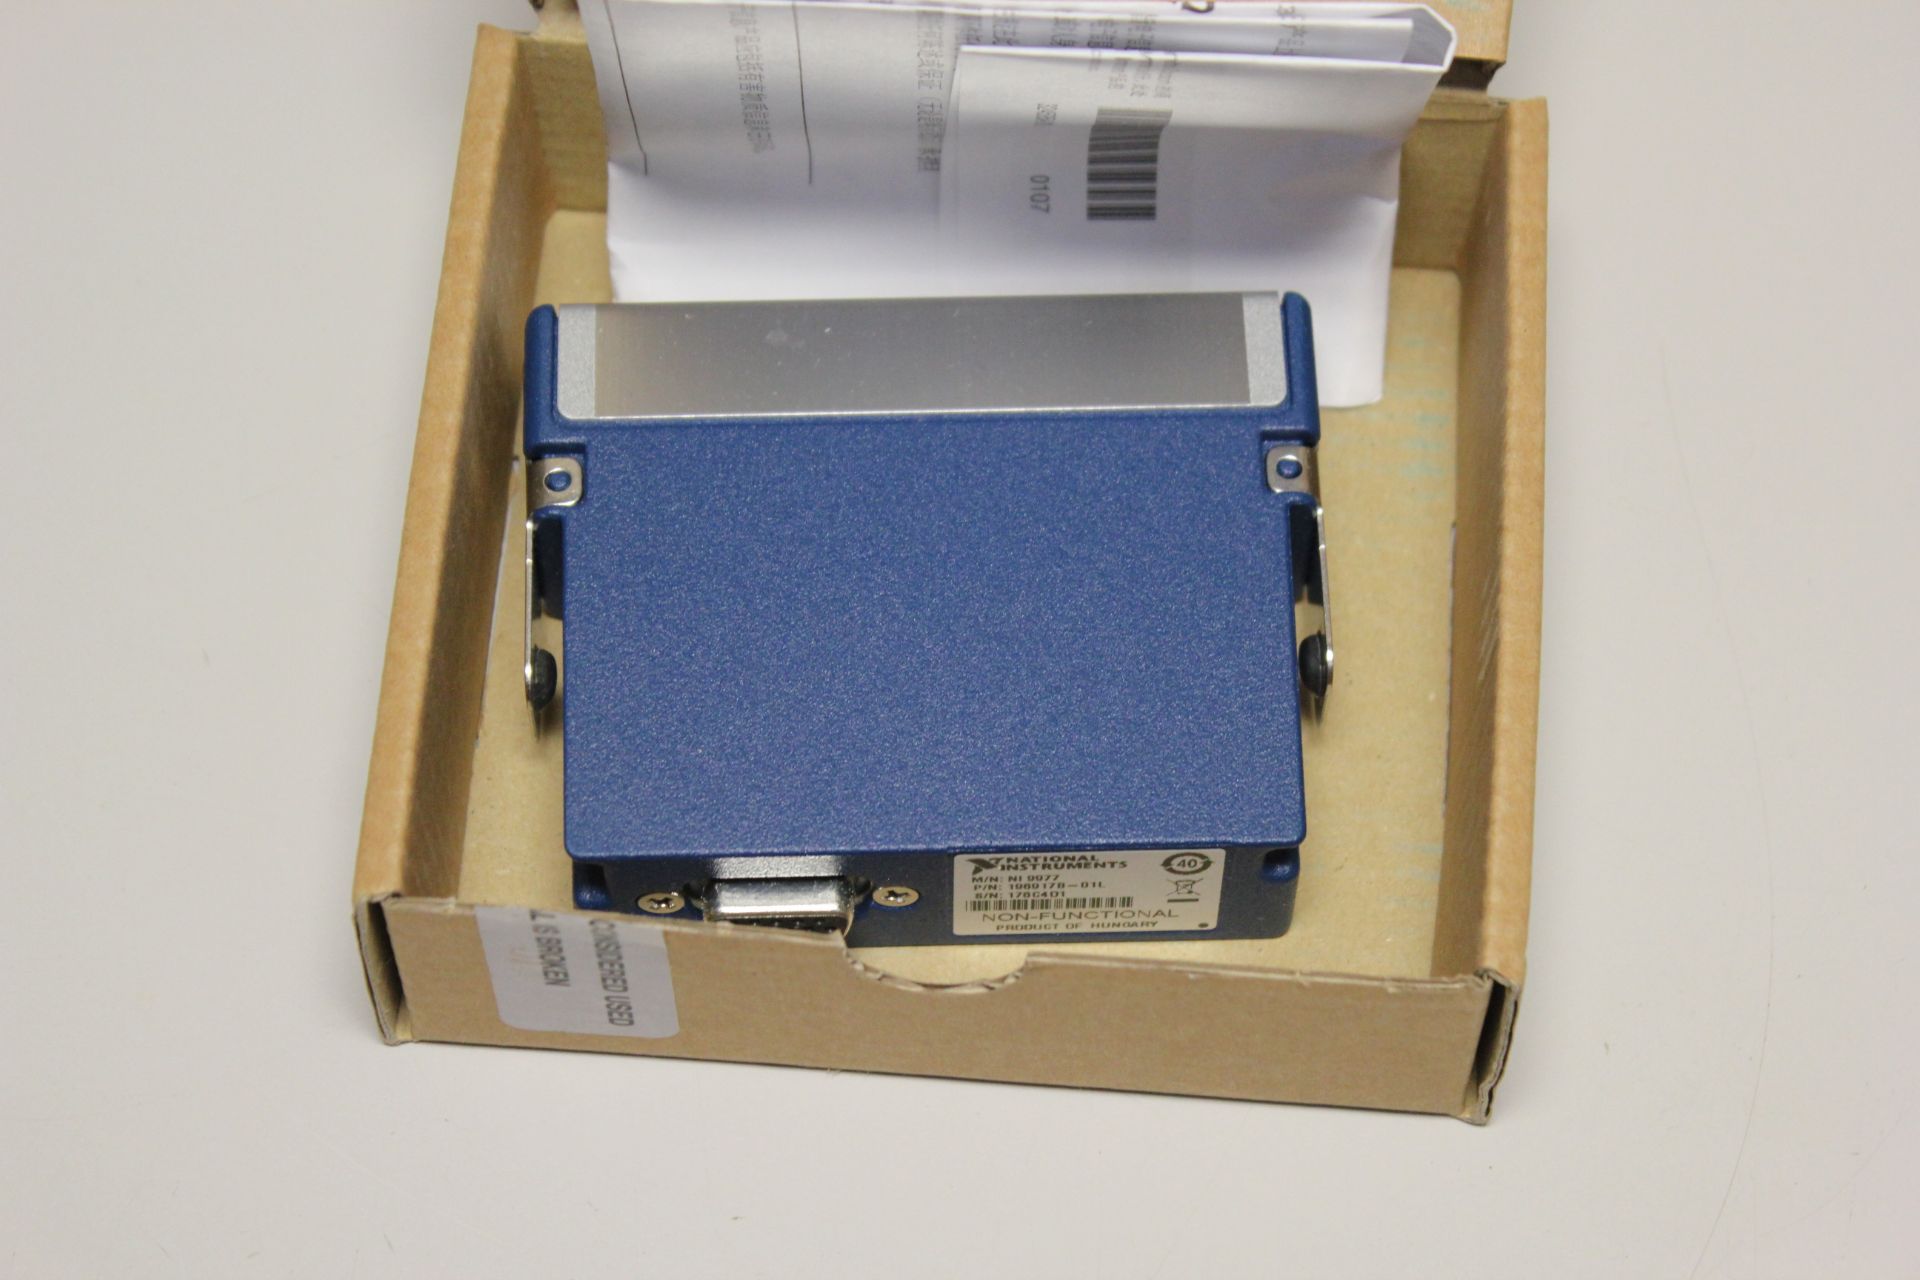 NEW NATIONAL INSTRUMENTS 9977 C SERIES FILLER MODULE FOR EMPTY SLOT - Image 3 of 3